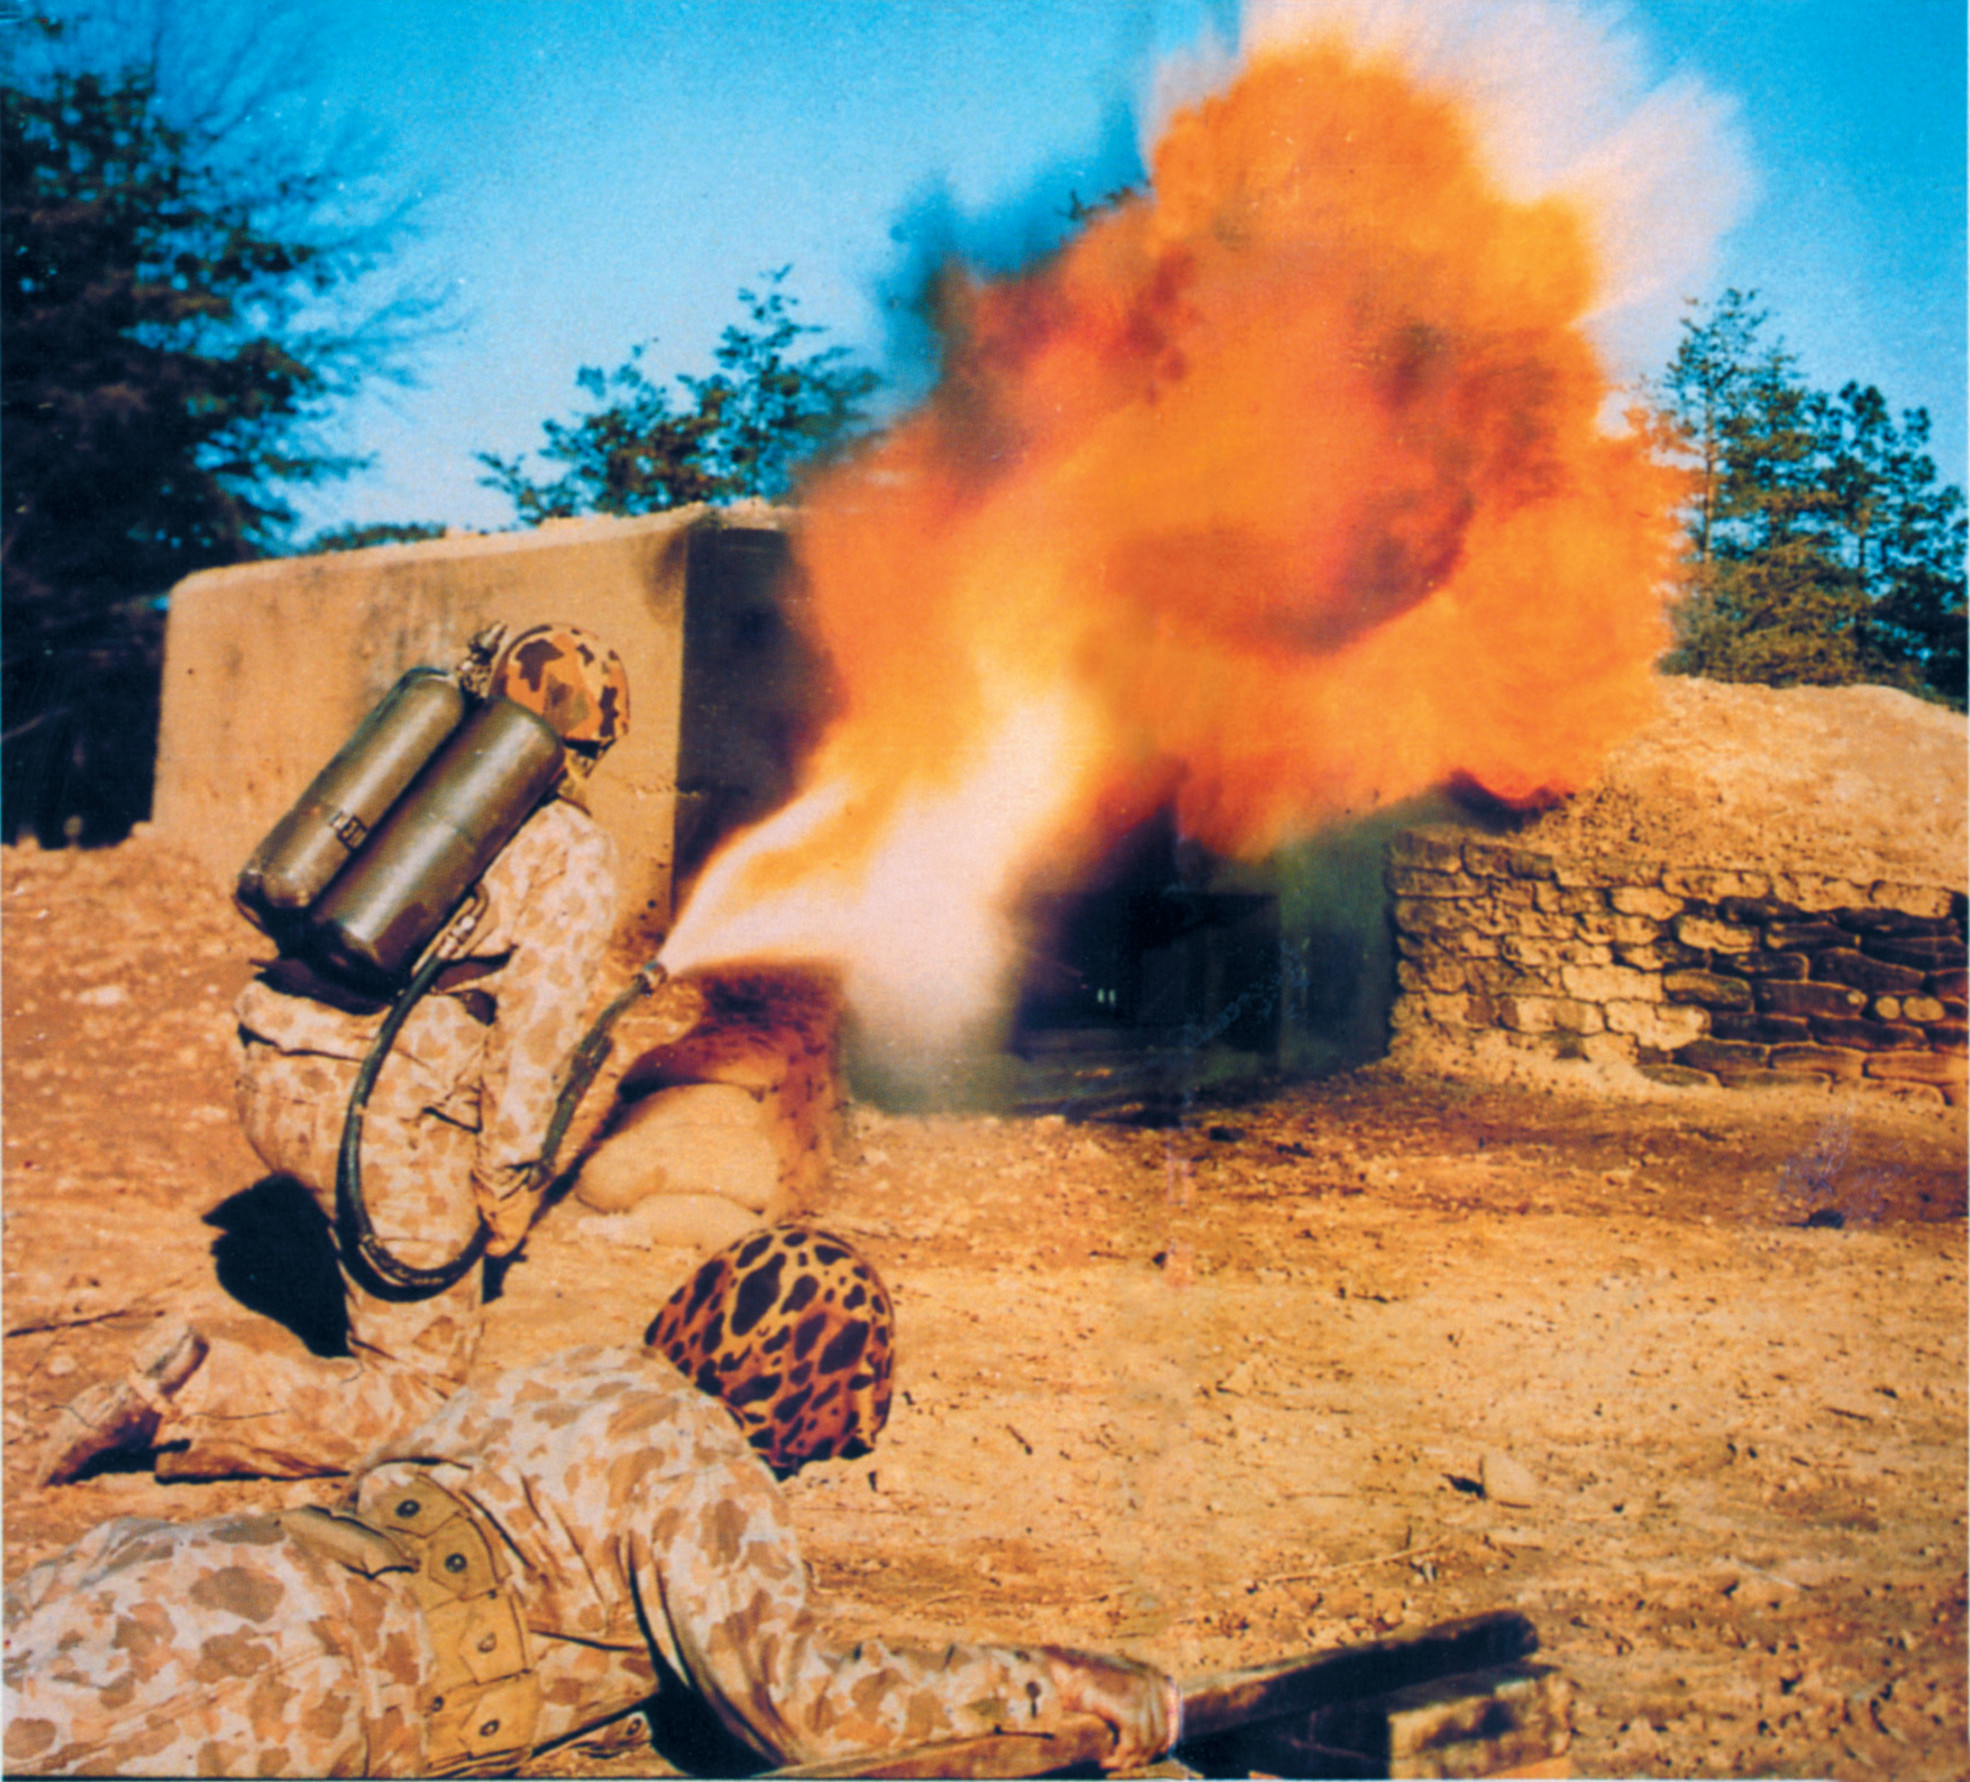 The M1 Flamethrower is seen here in use. The man at the bottom of the photo carried a dummy pole charge ready to thrust it into the pillbox opening once the flame has driven the occupants to cover. 